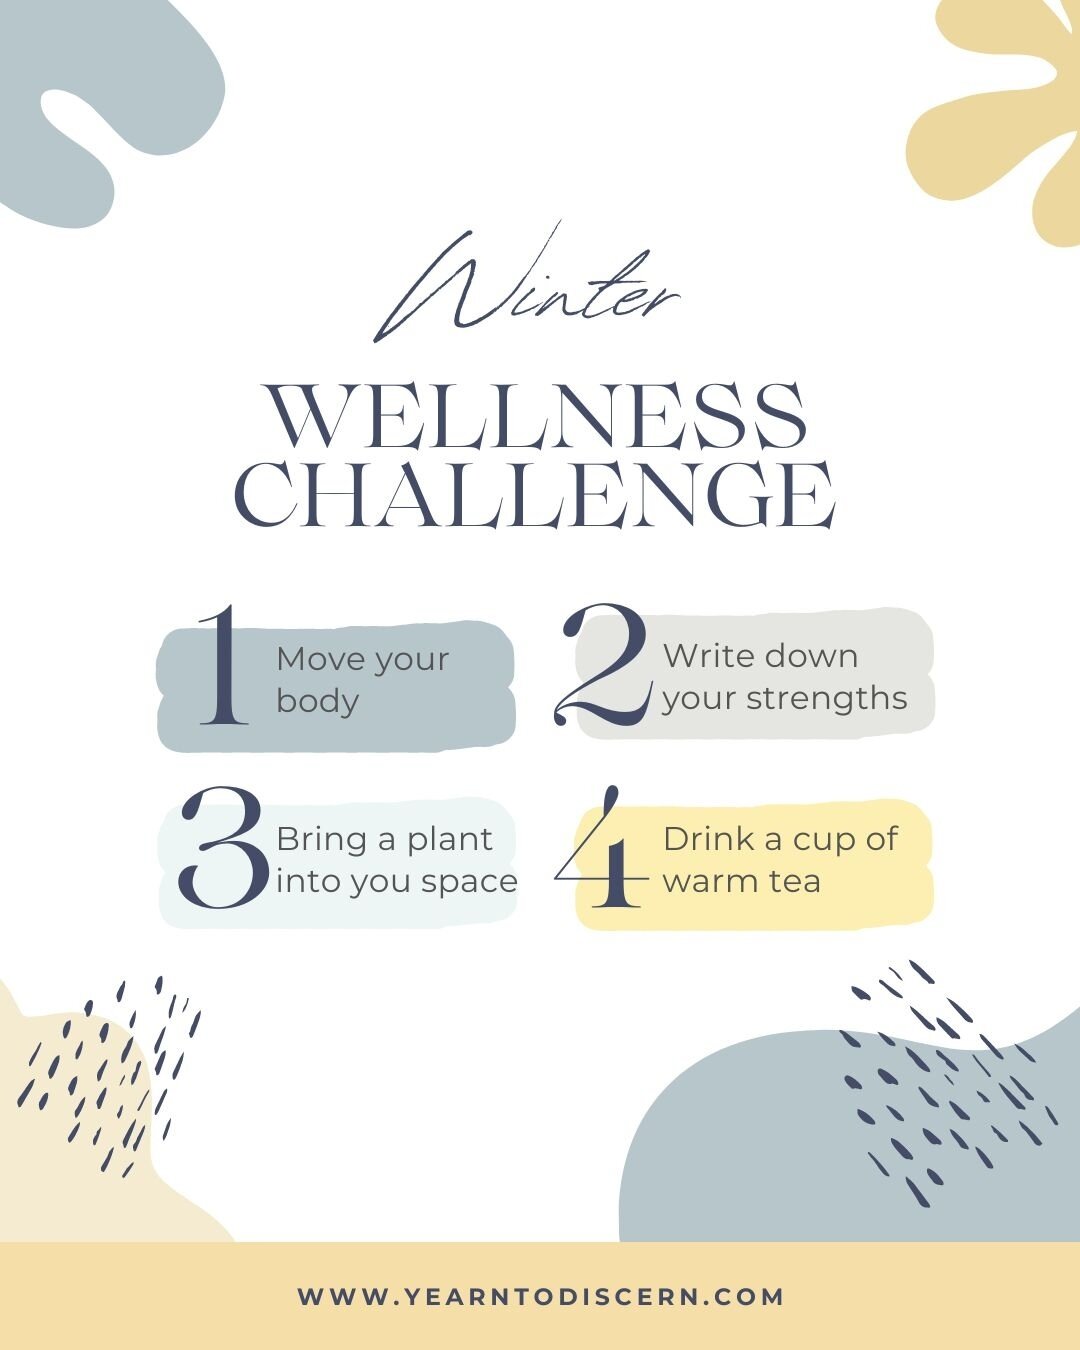 Embrace the chill today with a winter #WellnessChallenge !⁠
⁠
Let&rsquo;s create a morning move to get the blood flowing. 🧘&zwj;♀️ Jot down your daily strengths 📝, add a little green to your space, 🌿 or sip on a warm cup of tea to soothe the soul 